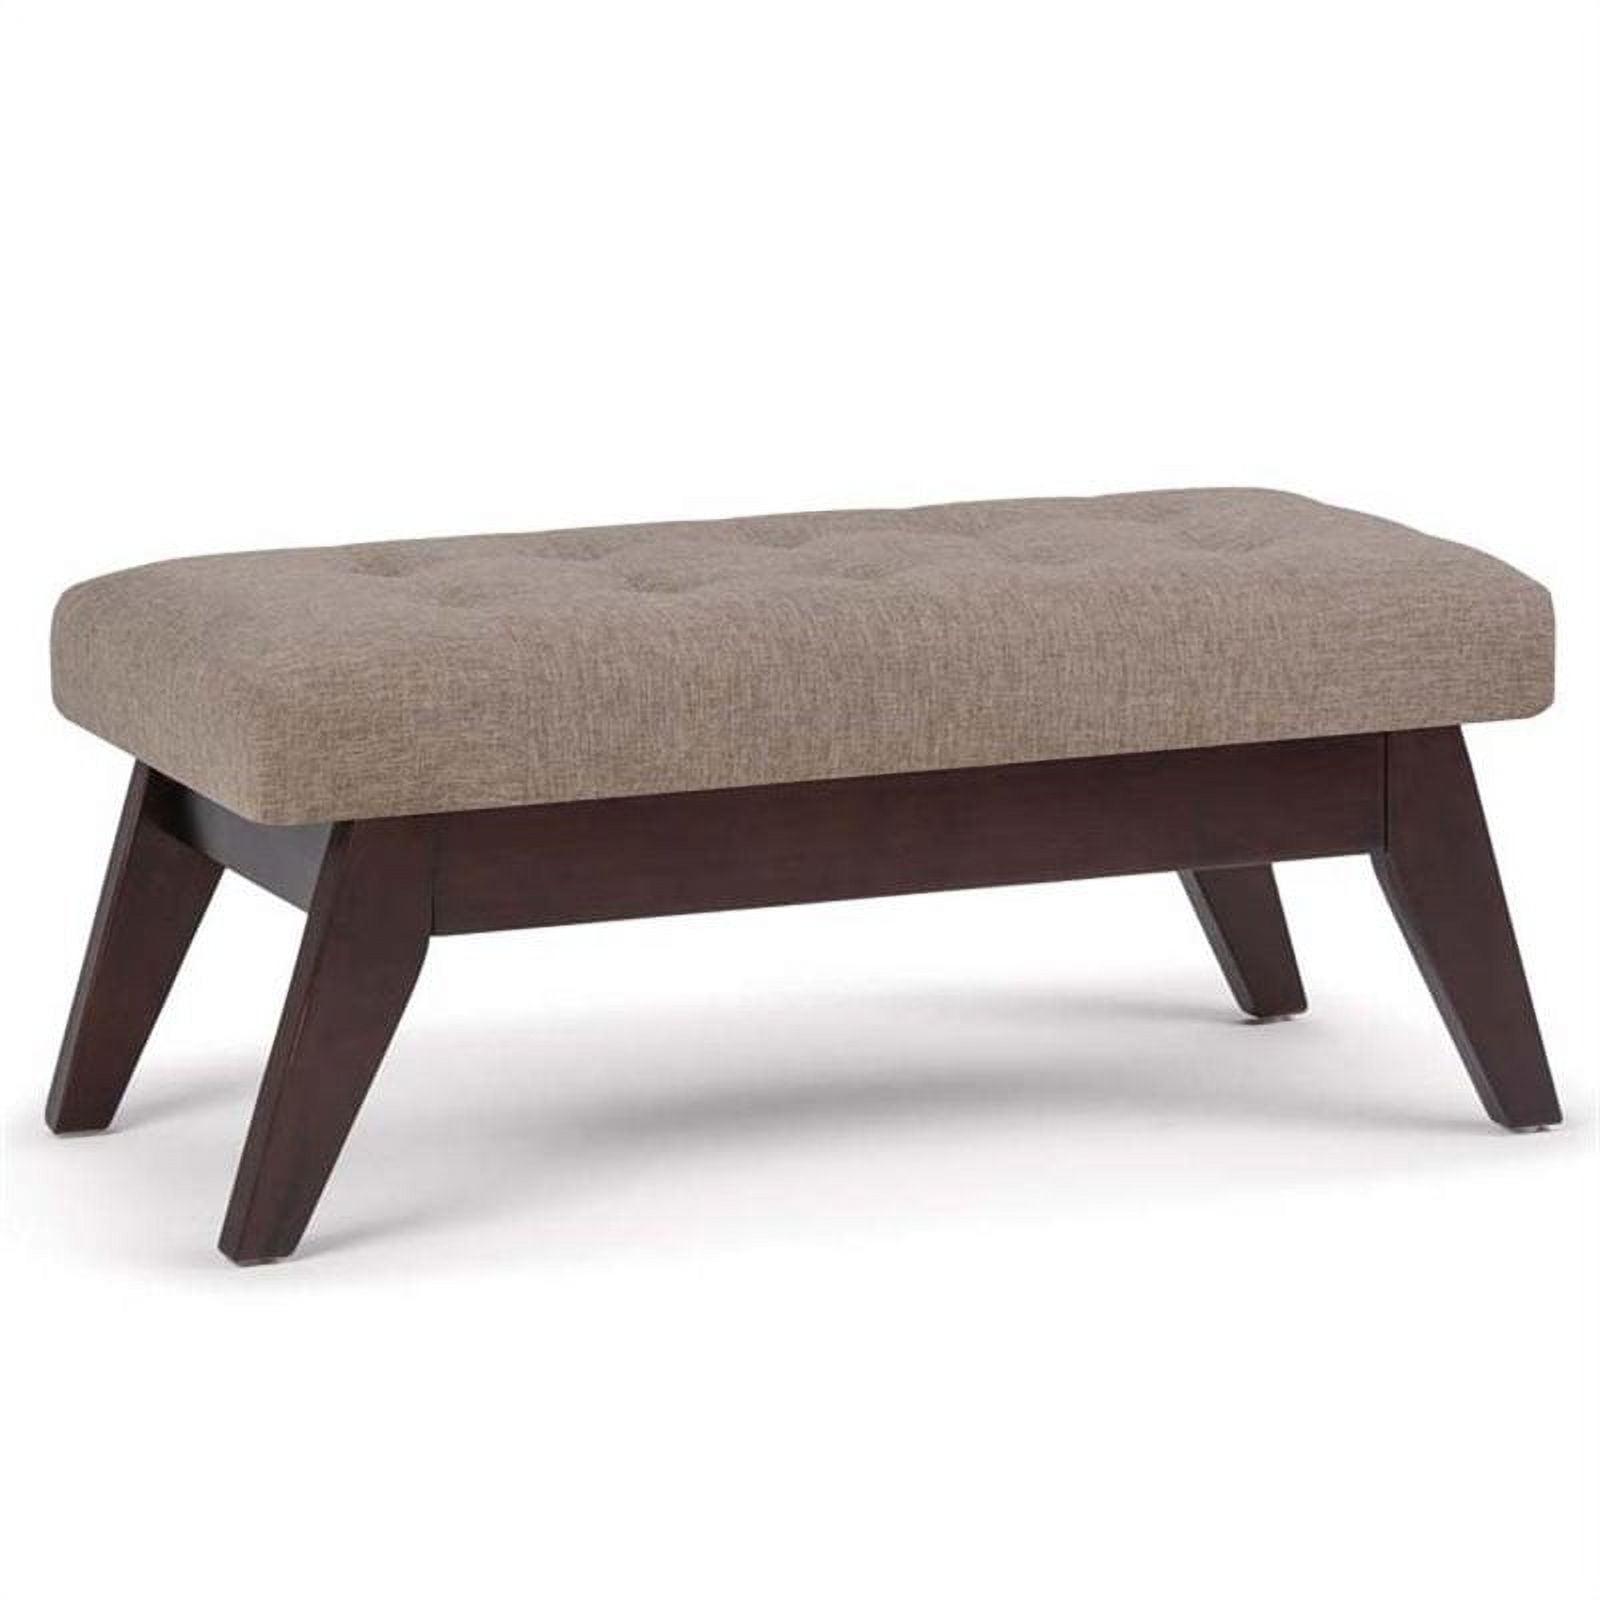 Draper 40" Wide Fawn Brown Linen Tufted Mid-Century Ottoman Bench